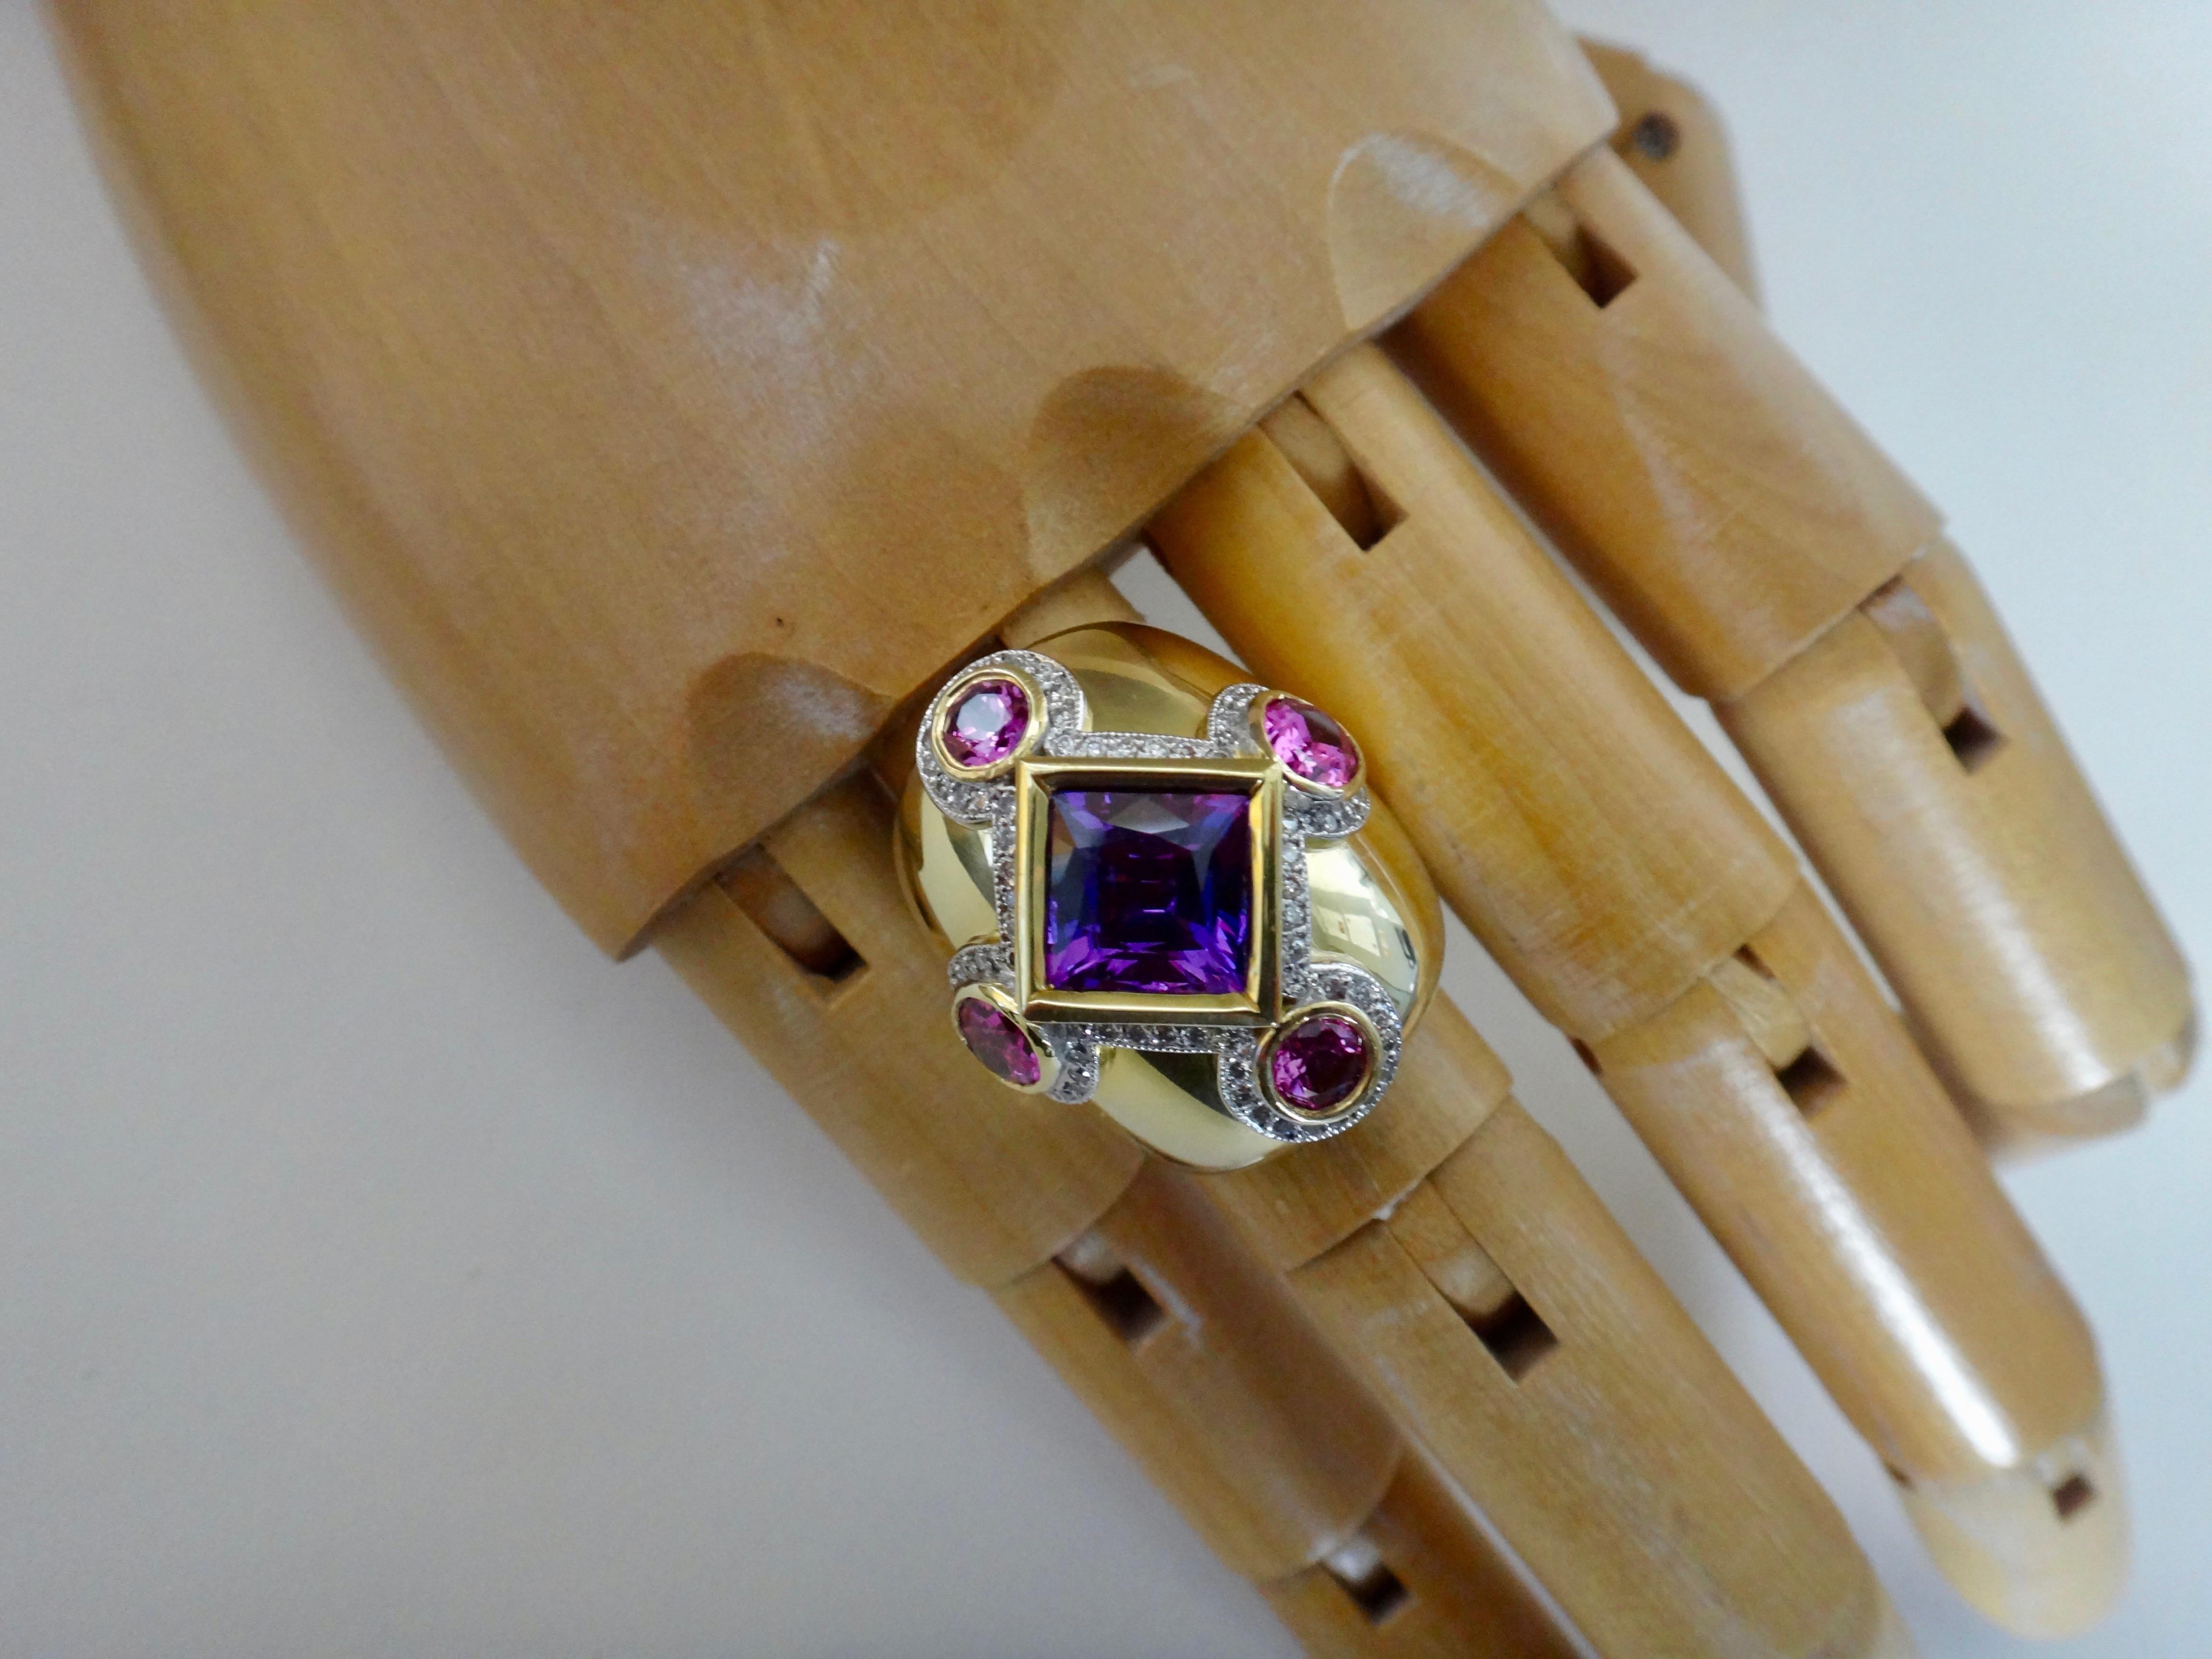 A square cut purple spinel is flanked by round and oval cut pink spinels (origin: Sri Lanka) in this one-of-a-kind 18k yellow gold dome ring.  Highlighting the five intensely colored gems is a frame of pave set, brilliant cut white diamonds.  The